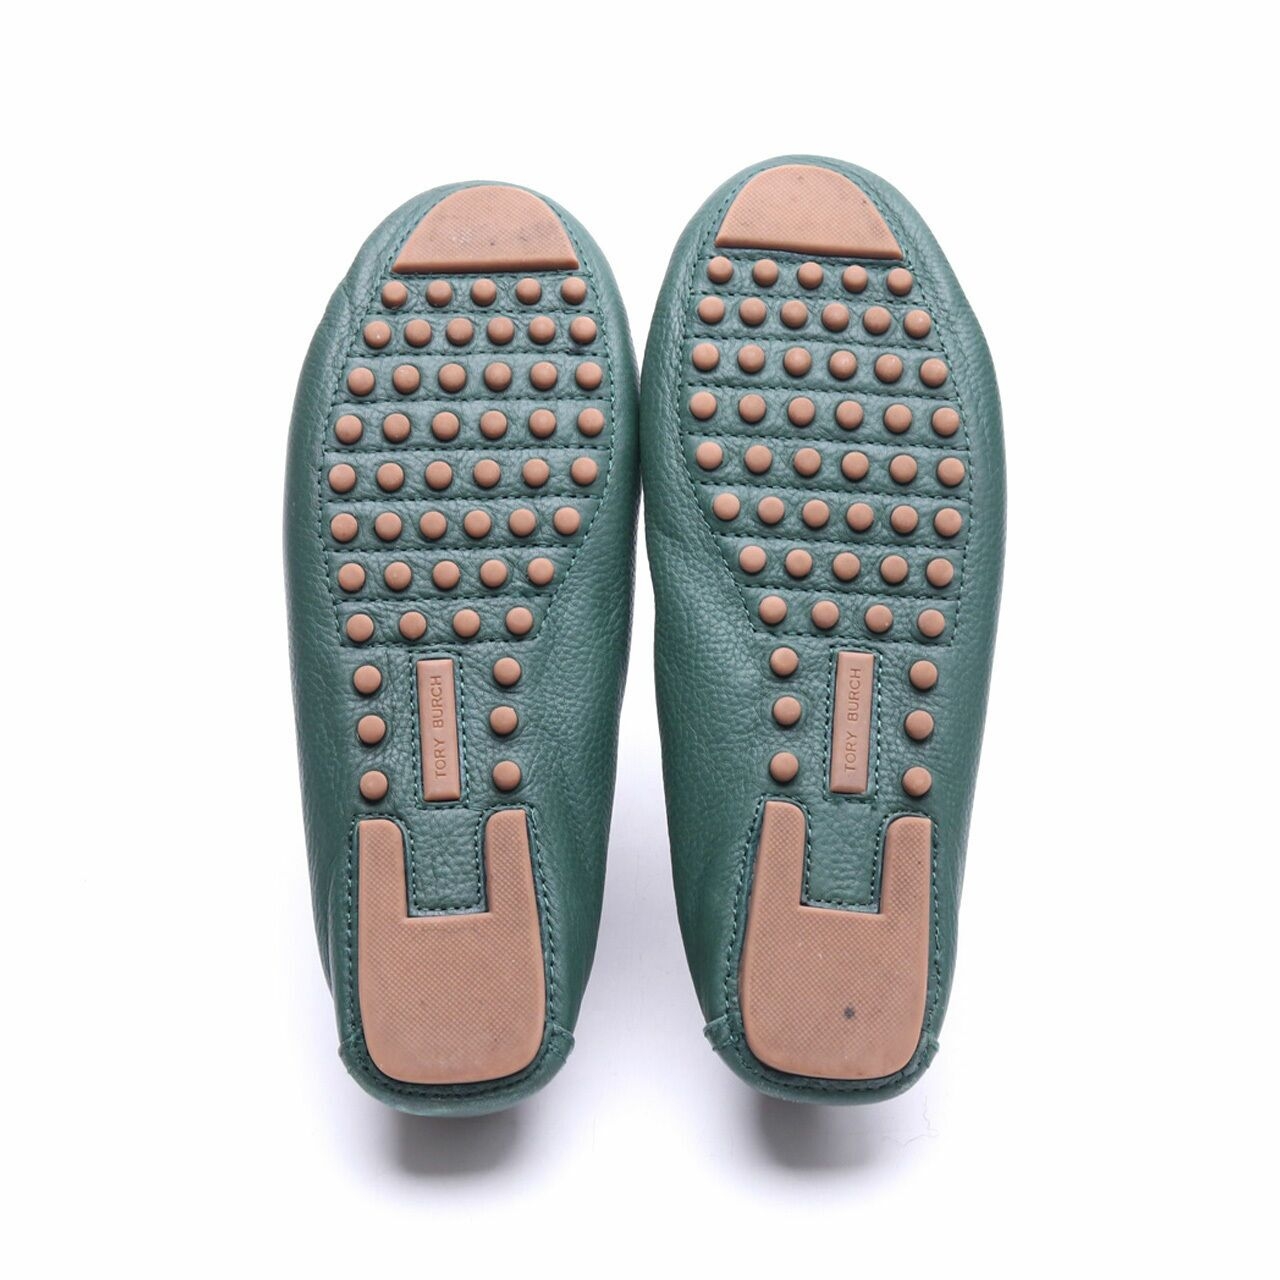 Tory Burch Green/ Norwood Lowell 2 Driver Tumbled Leather Flats Shoes